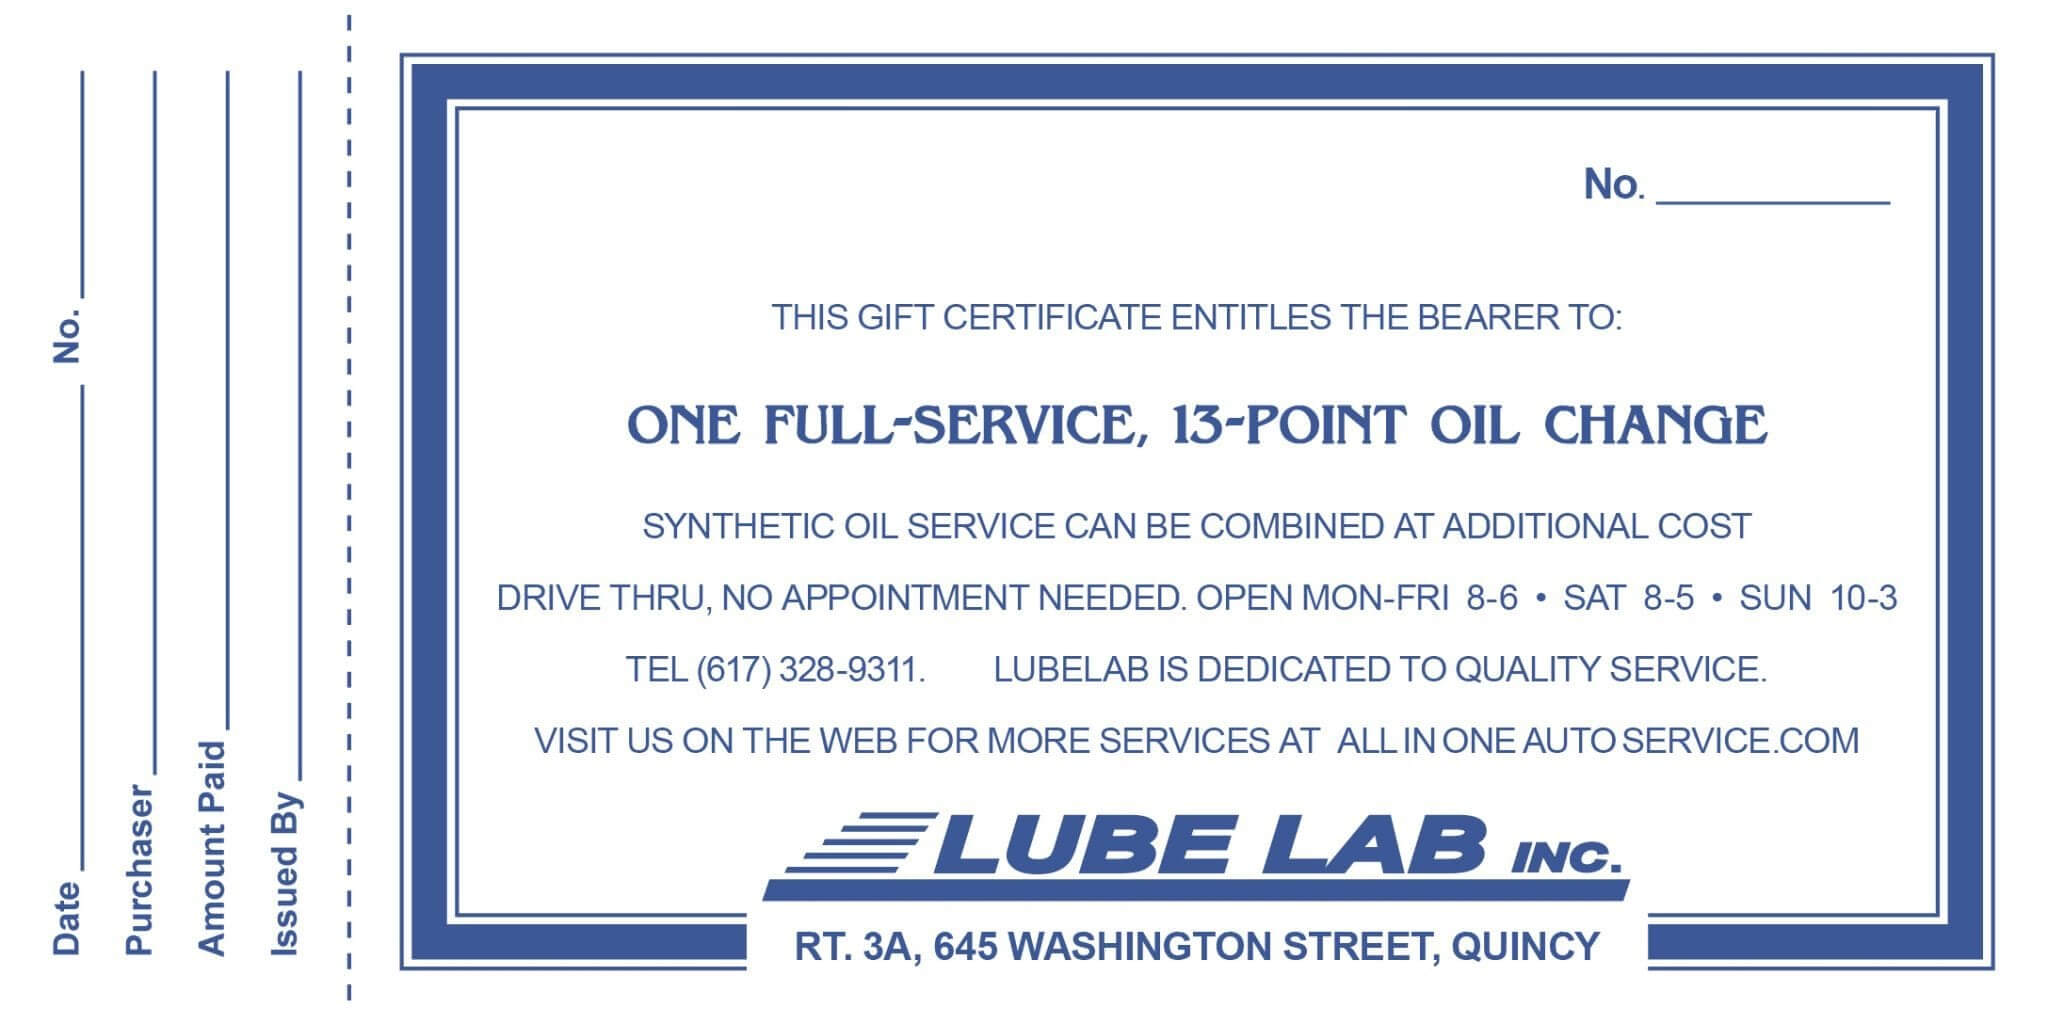 Full Service, 13 Point Oil Change | All In One & Lube Lab Within This Certificate Entitles The Bearer Template